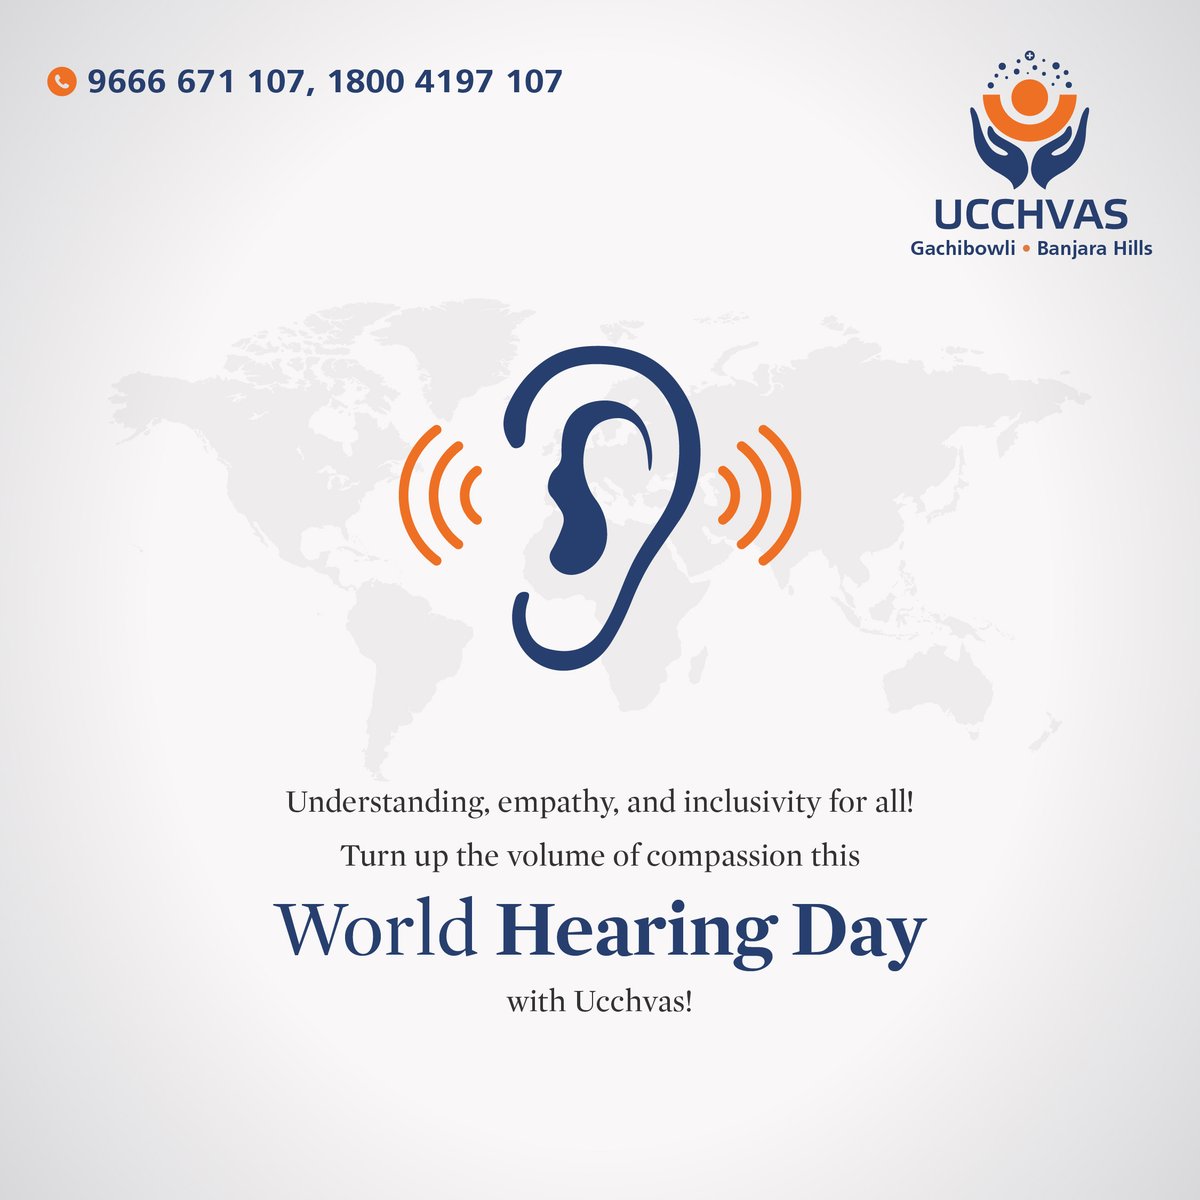 Today, we stand in solidarity with millions worldwide on WorldHearingDay. At Ucchvas, we're committed to promoting healthy hearing and communication for all. Let's raise awareness, spread knowledge, and support those with hearing impairments.  

#UcchvasCares #HealthyHearing